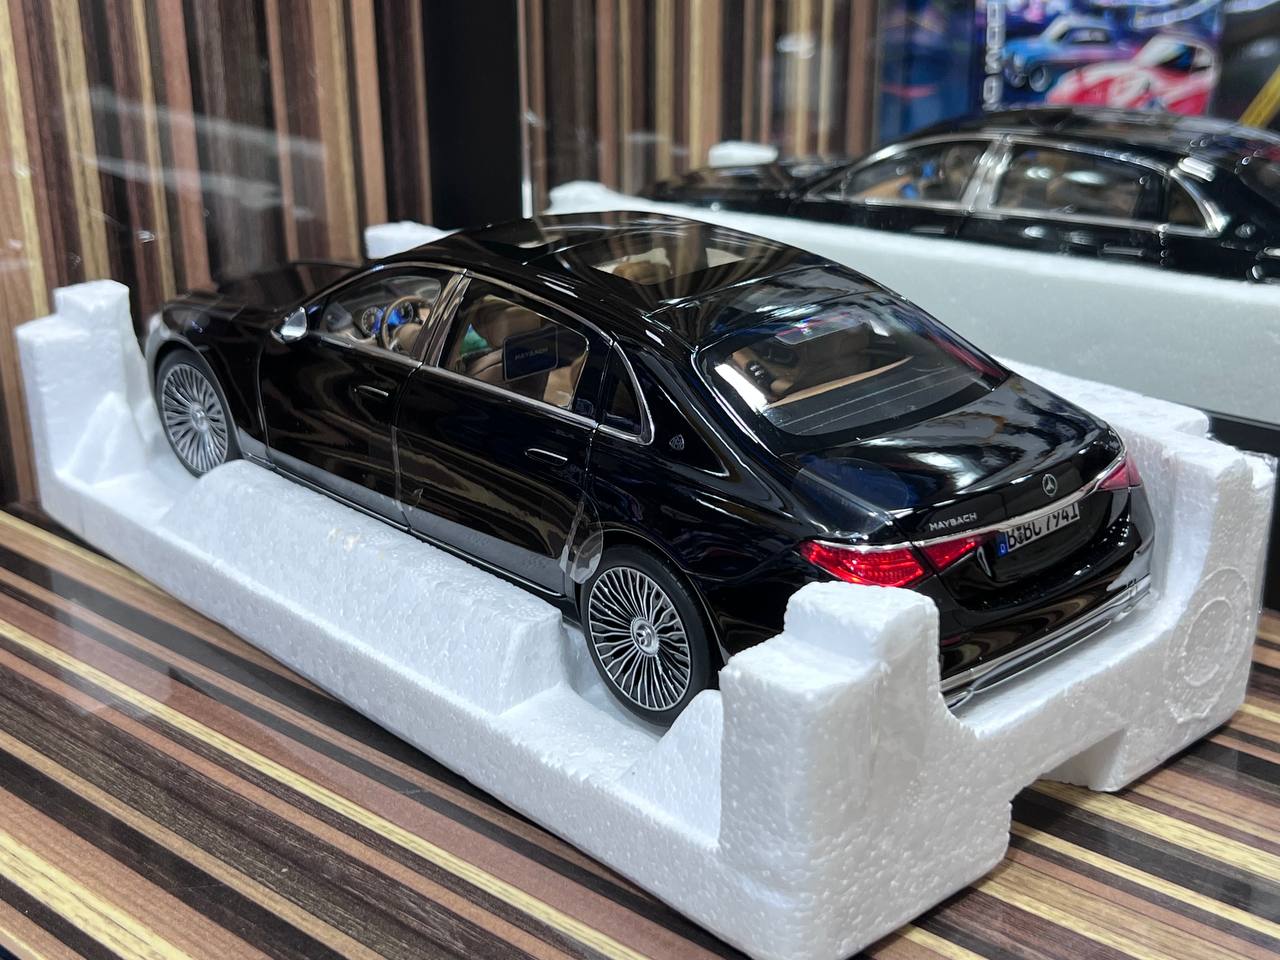 1/18 Diecast Mercedes-Maybach S-Class 2021 Black Norev Scale Model Car